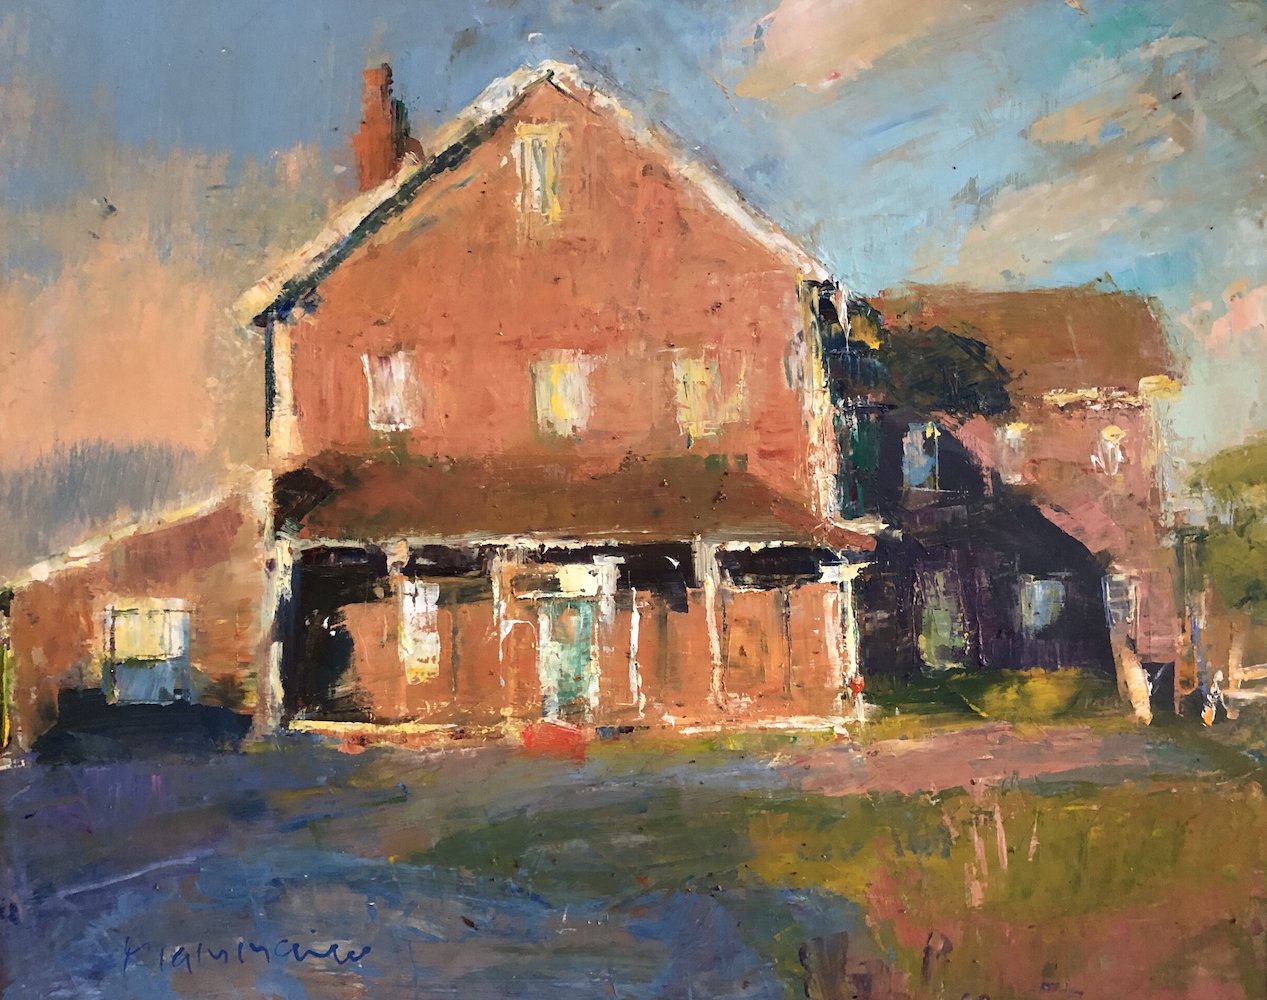 Highland House, Plein Air Oil Painting by Mary Giammarino